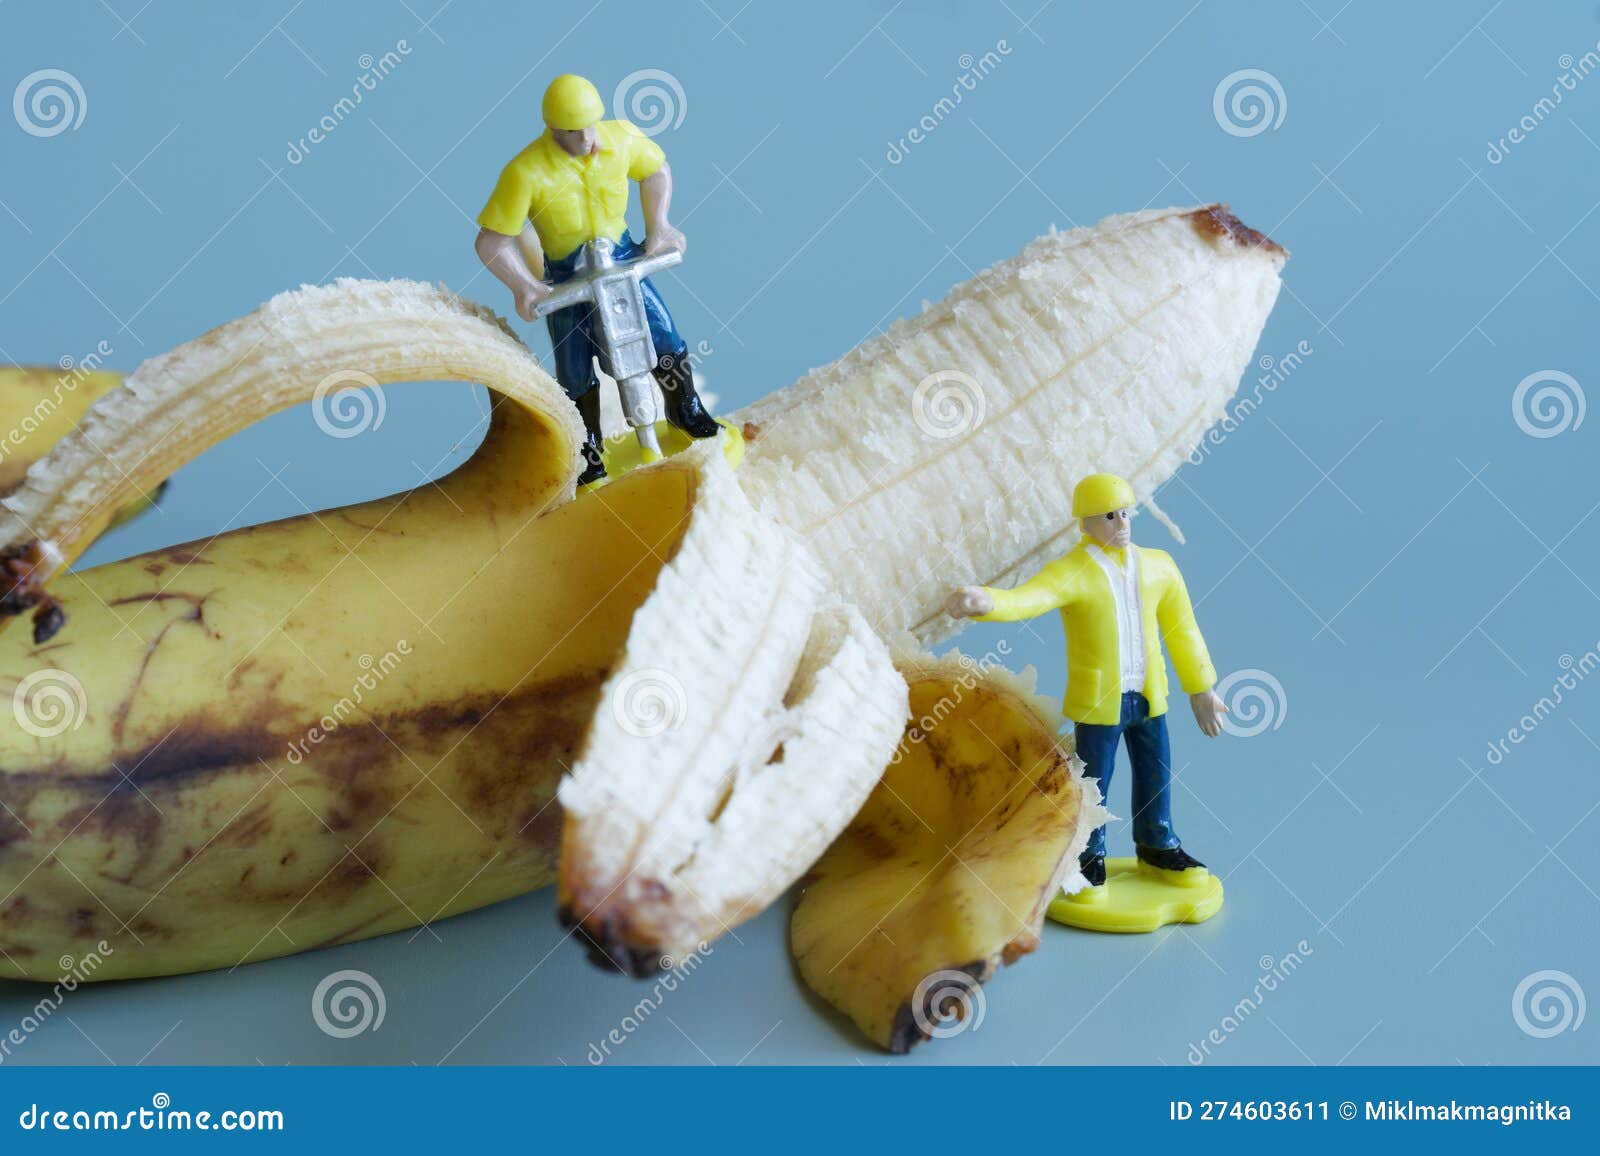 Toy People - Workers with a Jackhammer Peel a Yellow Overripe